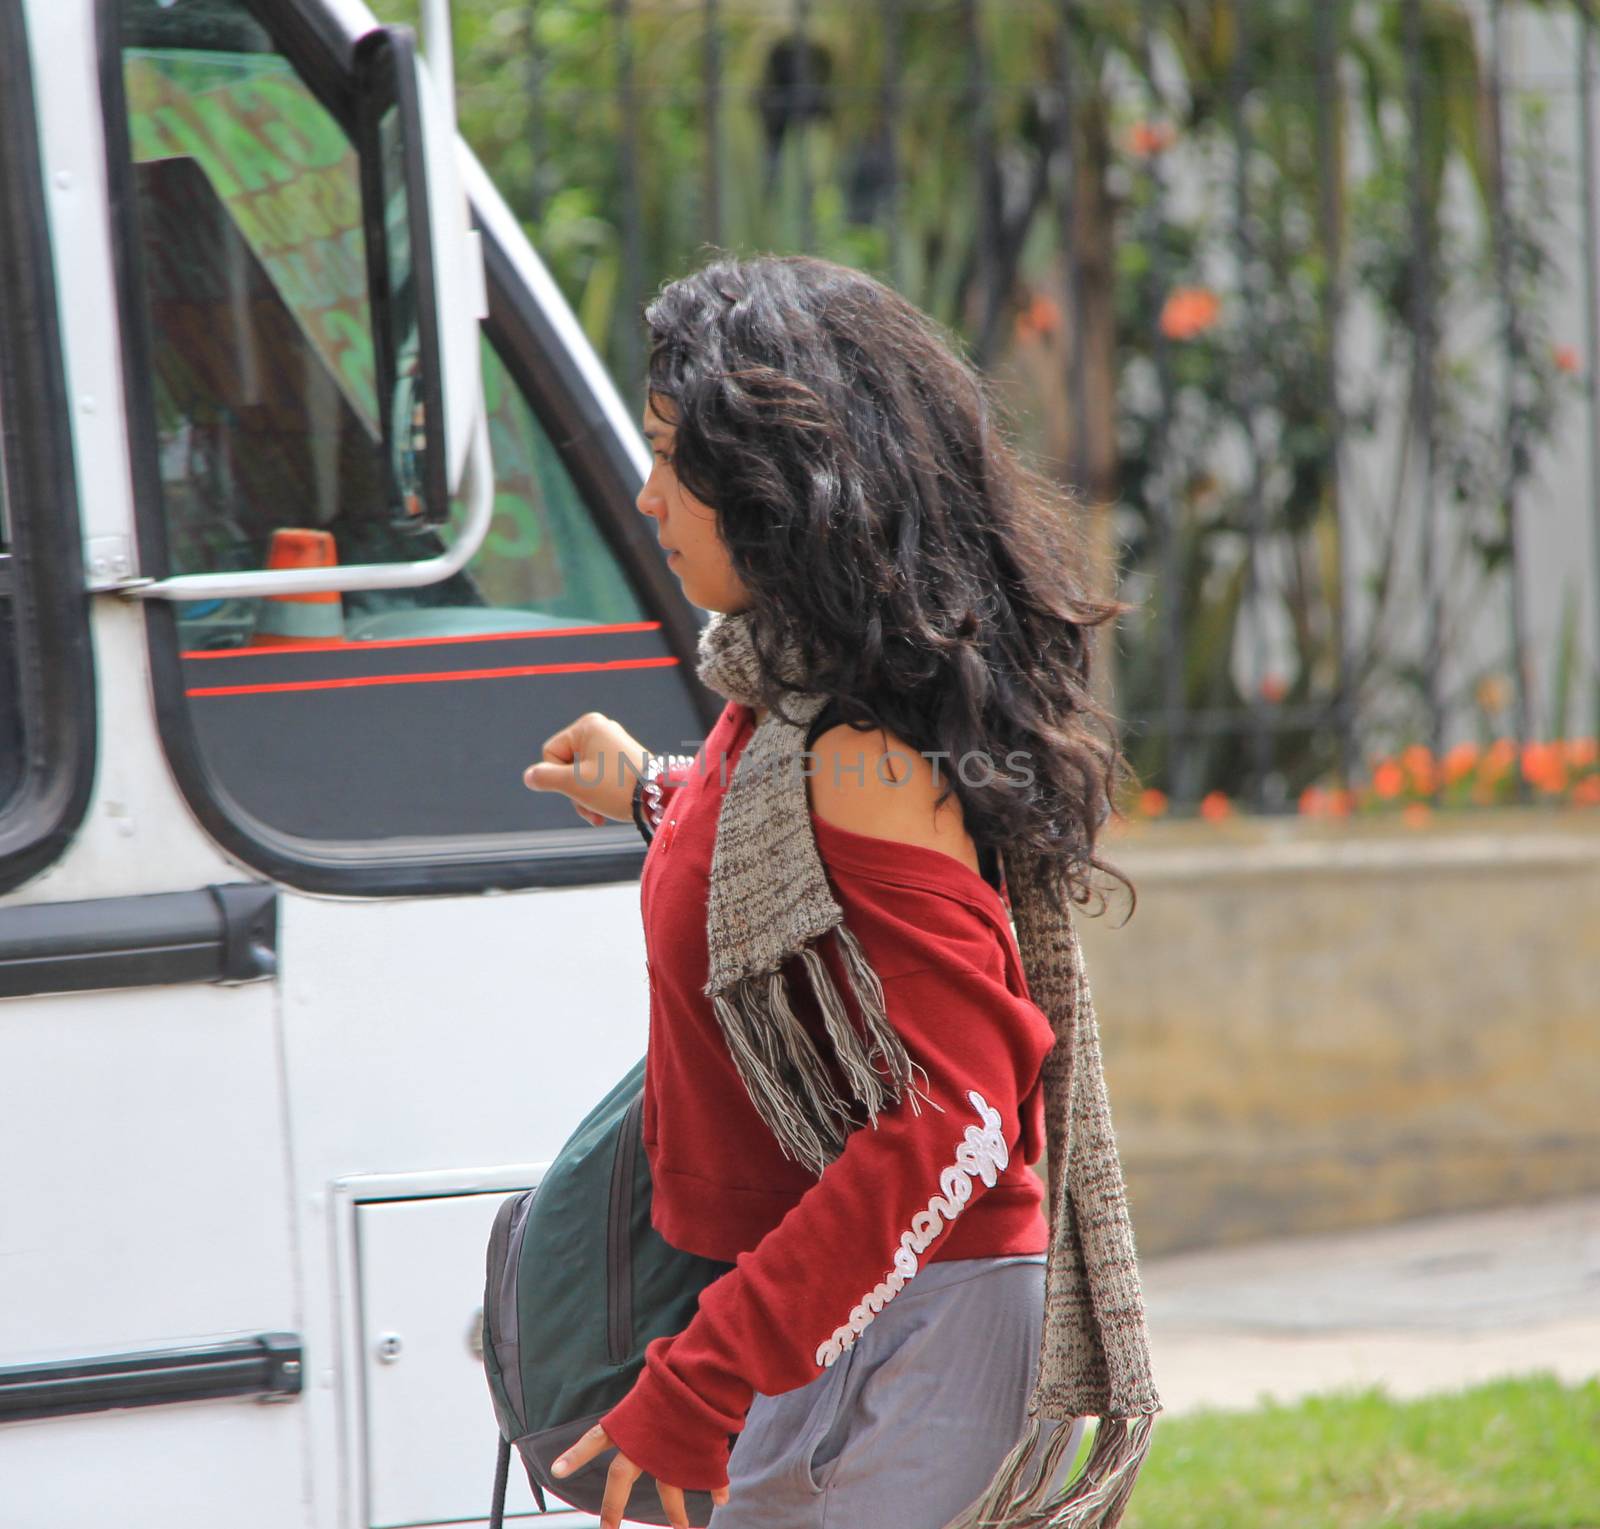 A young lady getting on a bus in Bogota, Columbia
03 May 2014
No model release
Editorial only